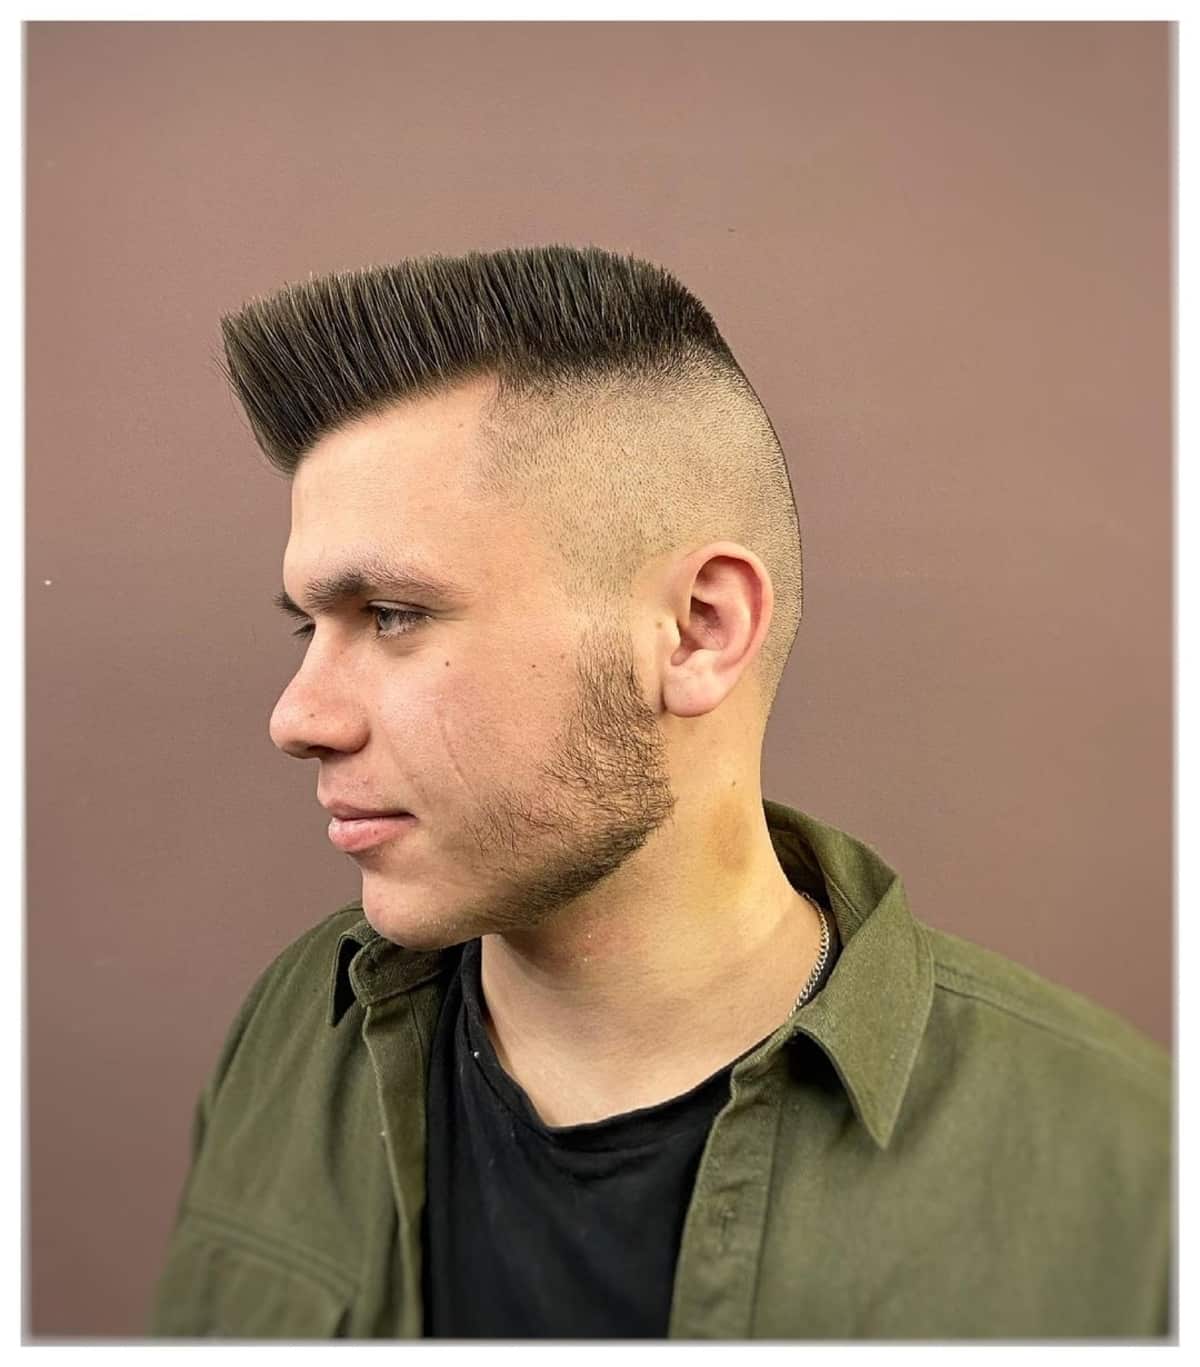 21 Best Military Haircut Ideas for a Clean and Crisp Look